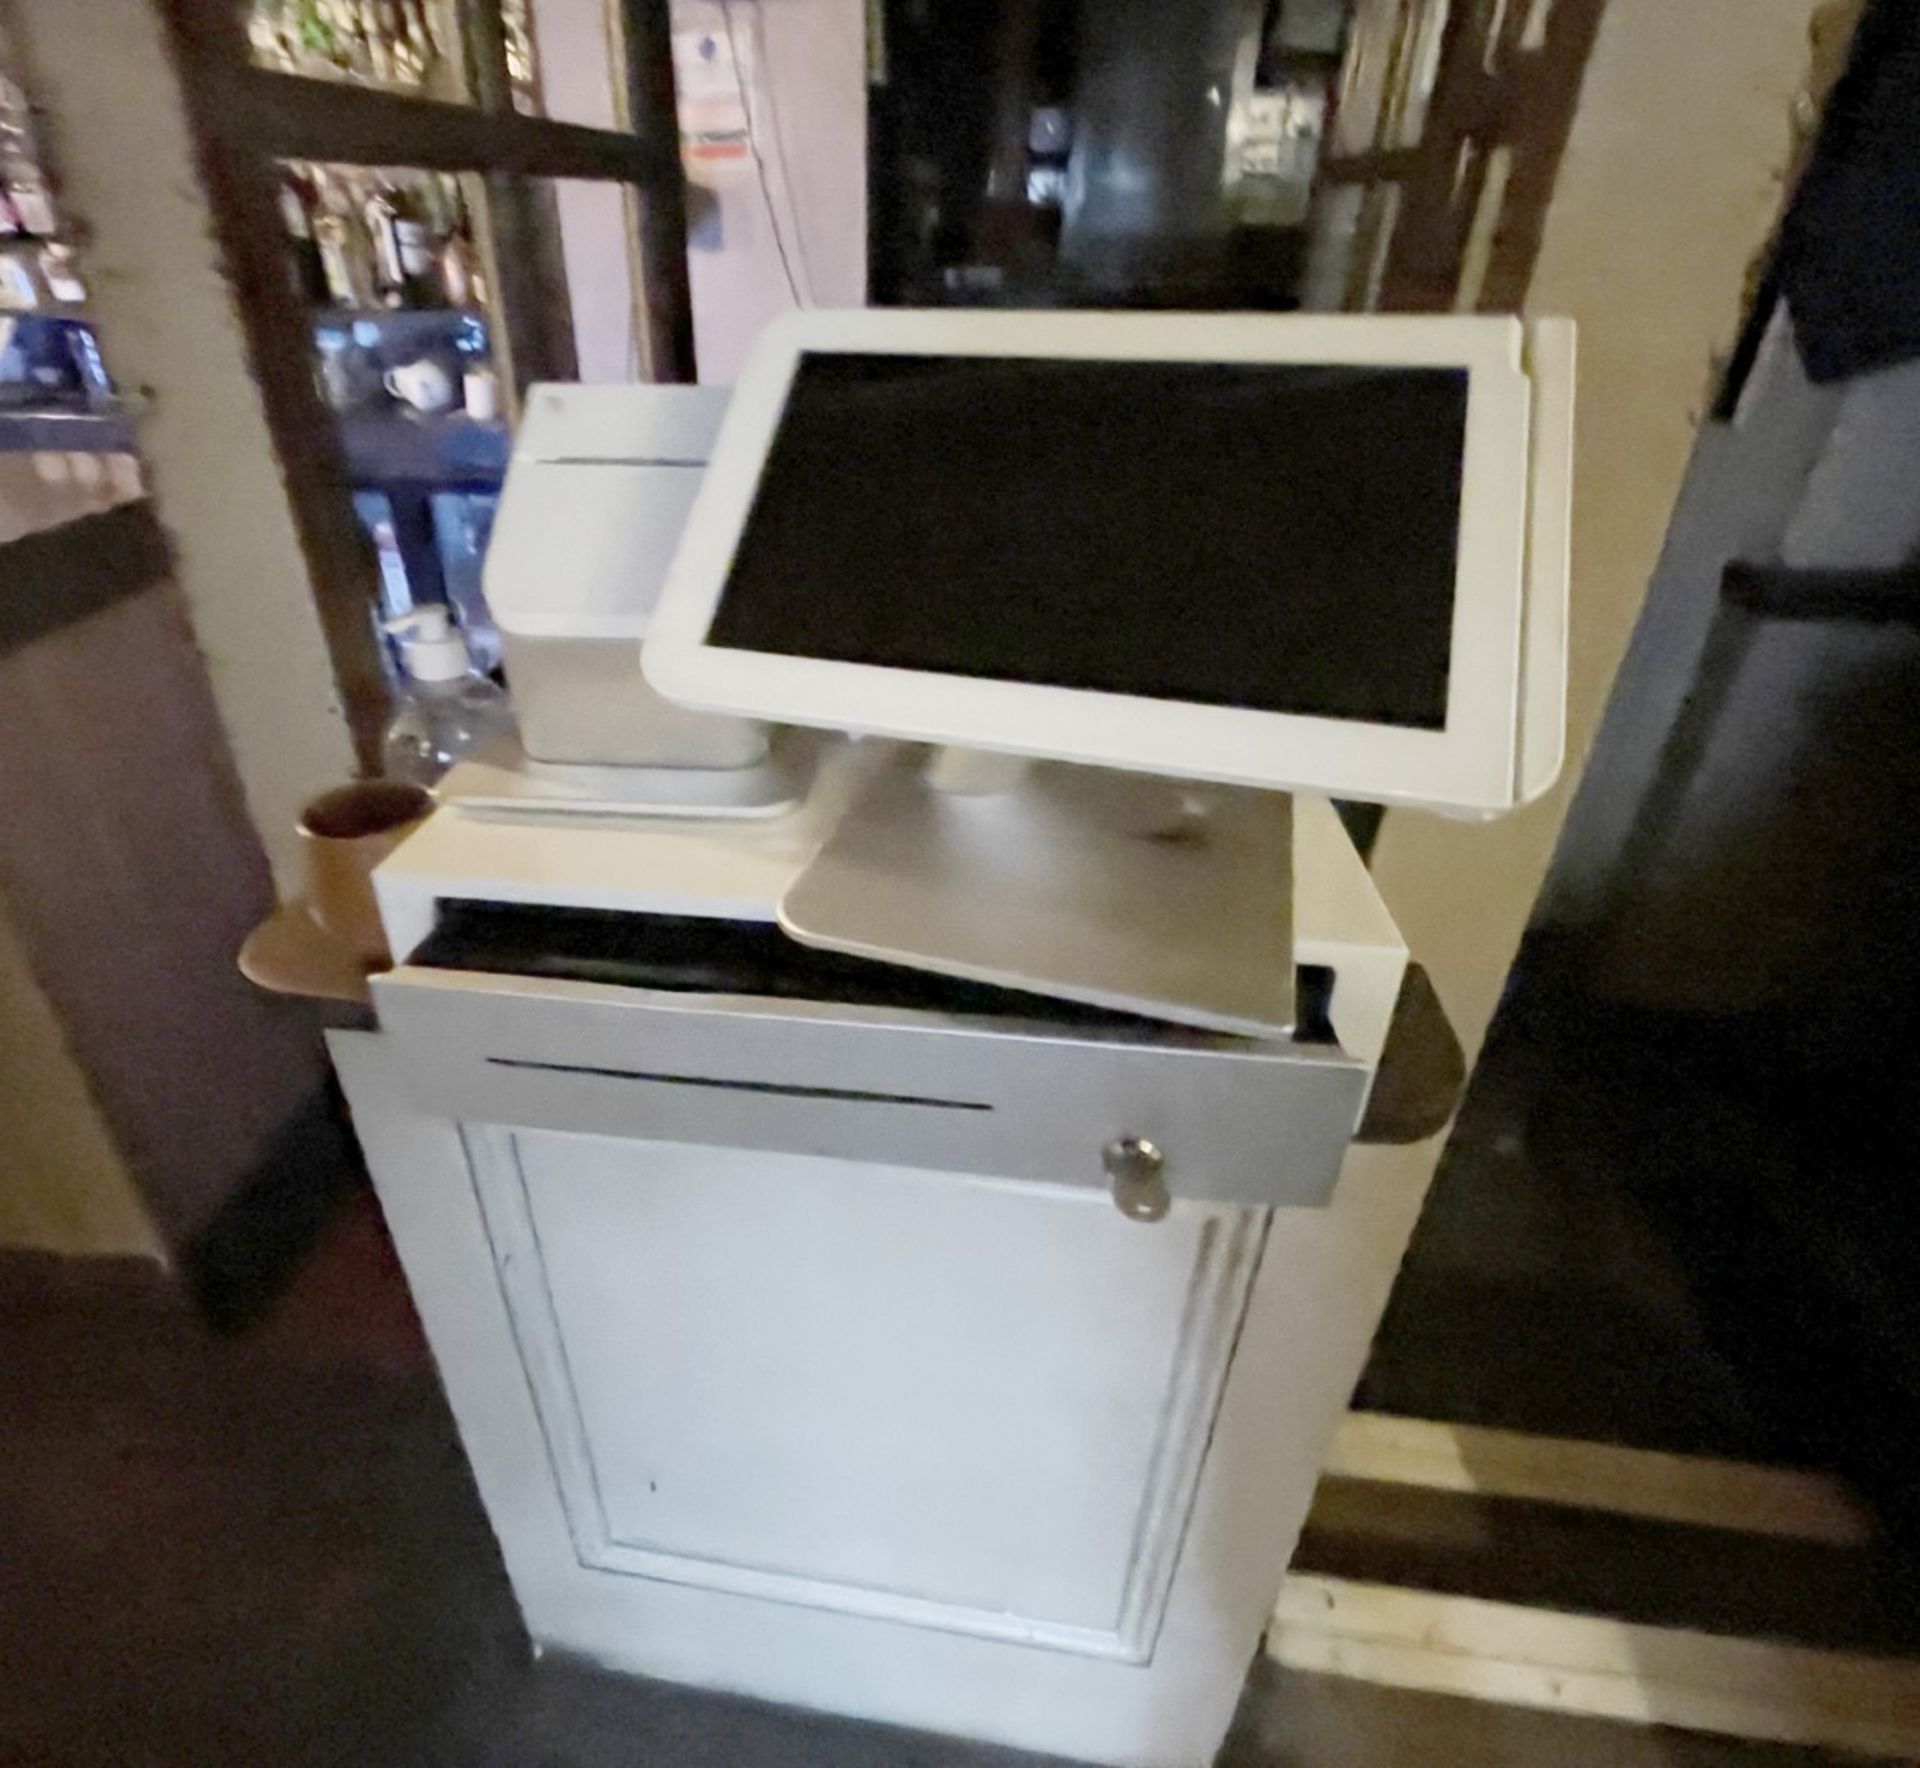 1 x CLOVER Station Next Generation POS System - Image 2 of 7